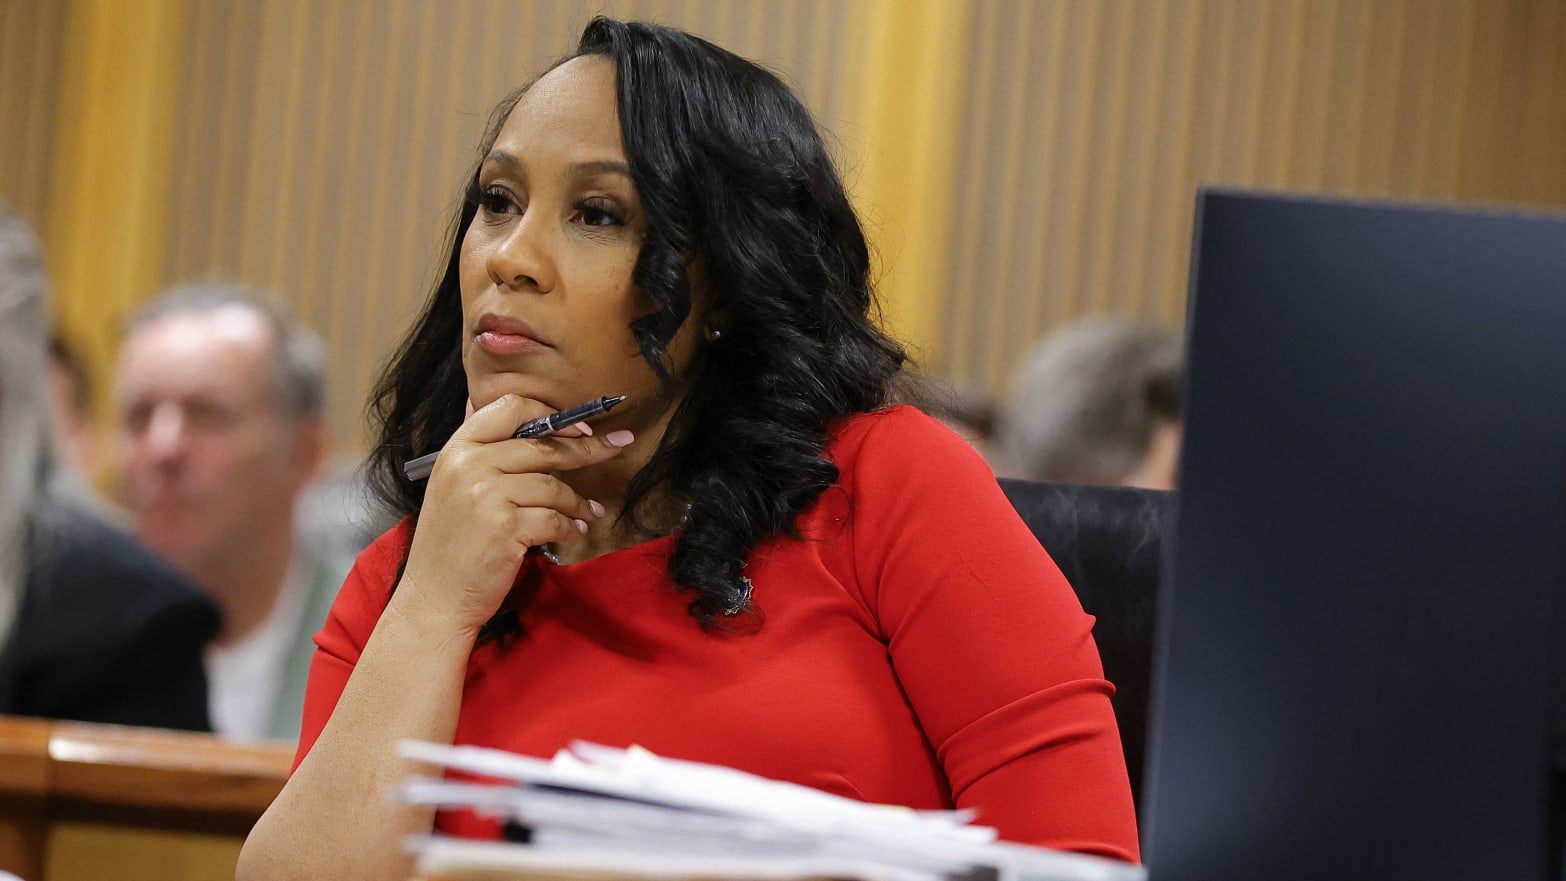 Fulton County District Attorney Fani Willis listens during the final arguments in her disqualification hearing at the Fulton County Courthouse in Atlanta, Georgia.